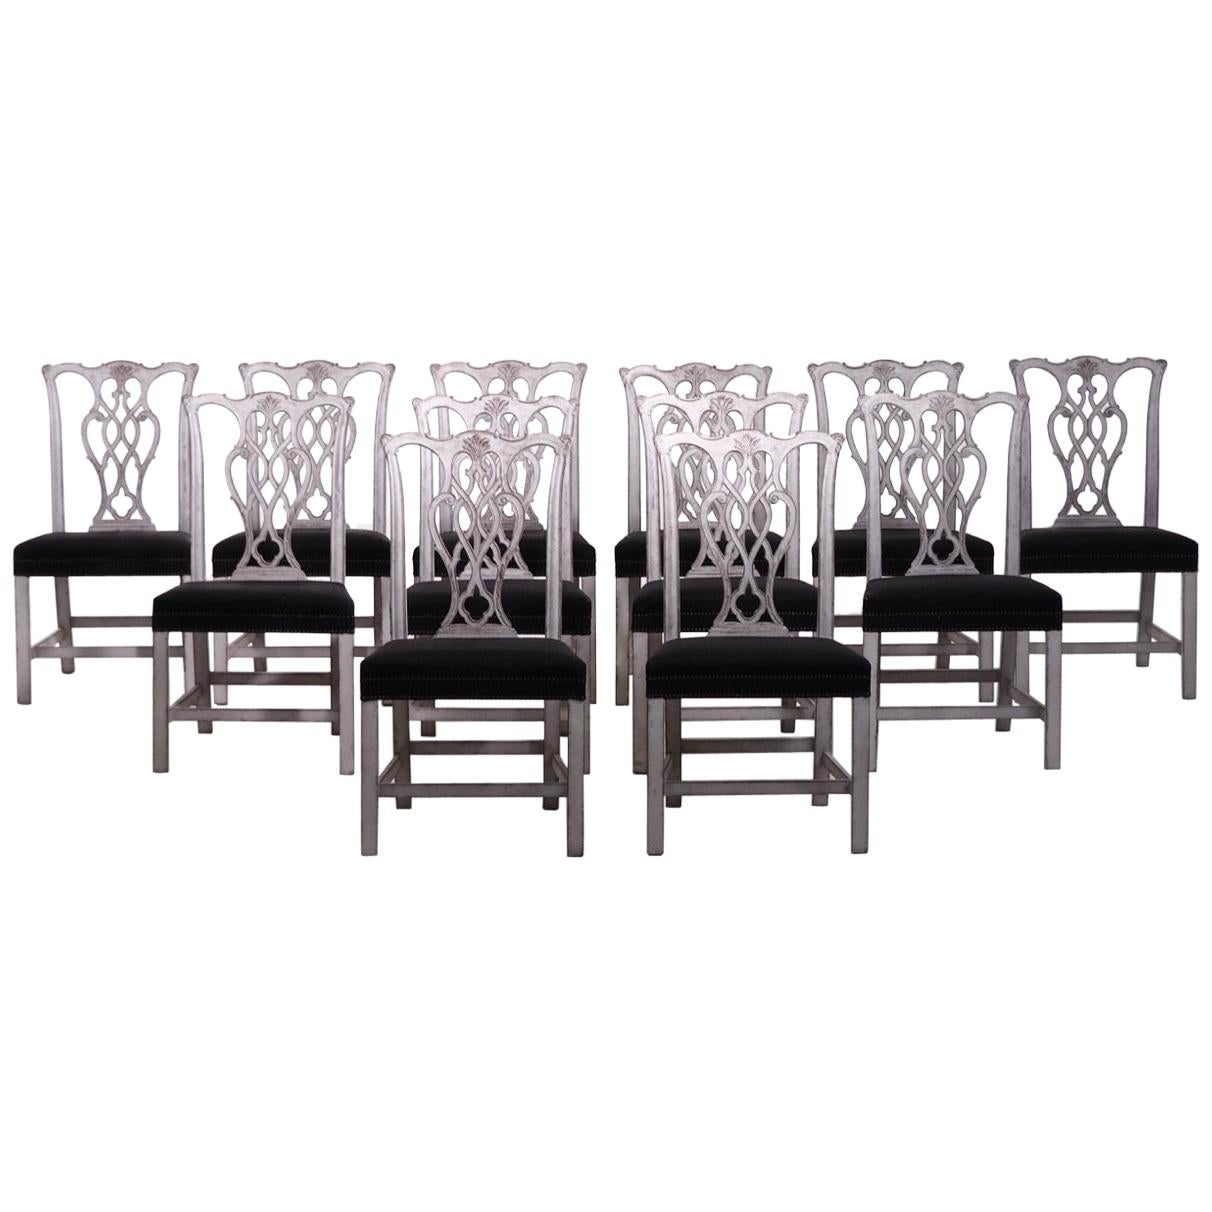 Set of 12 European Chairs, 19th Century For Sale